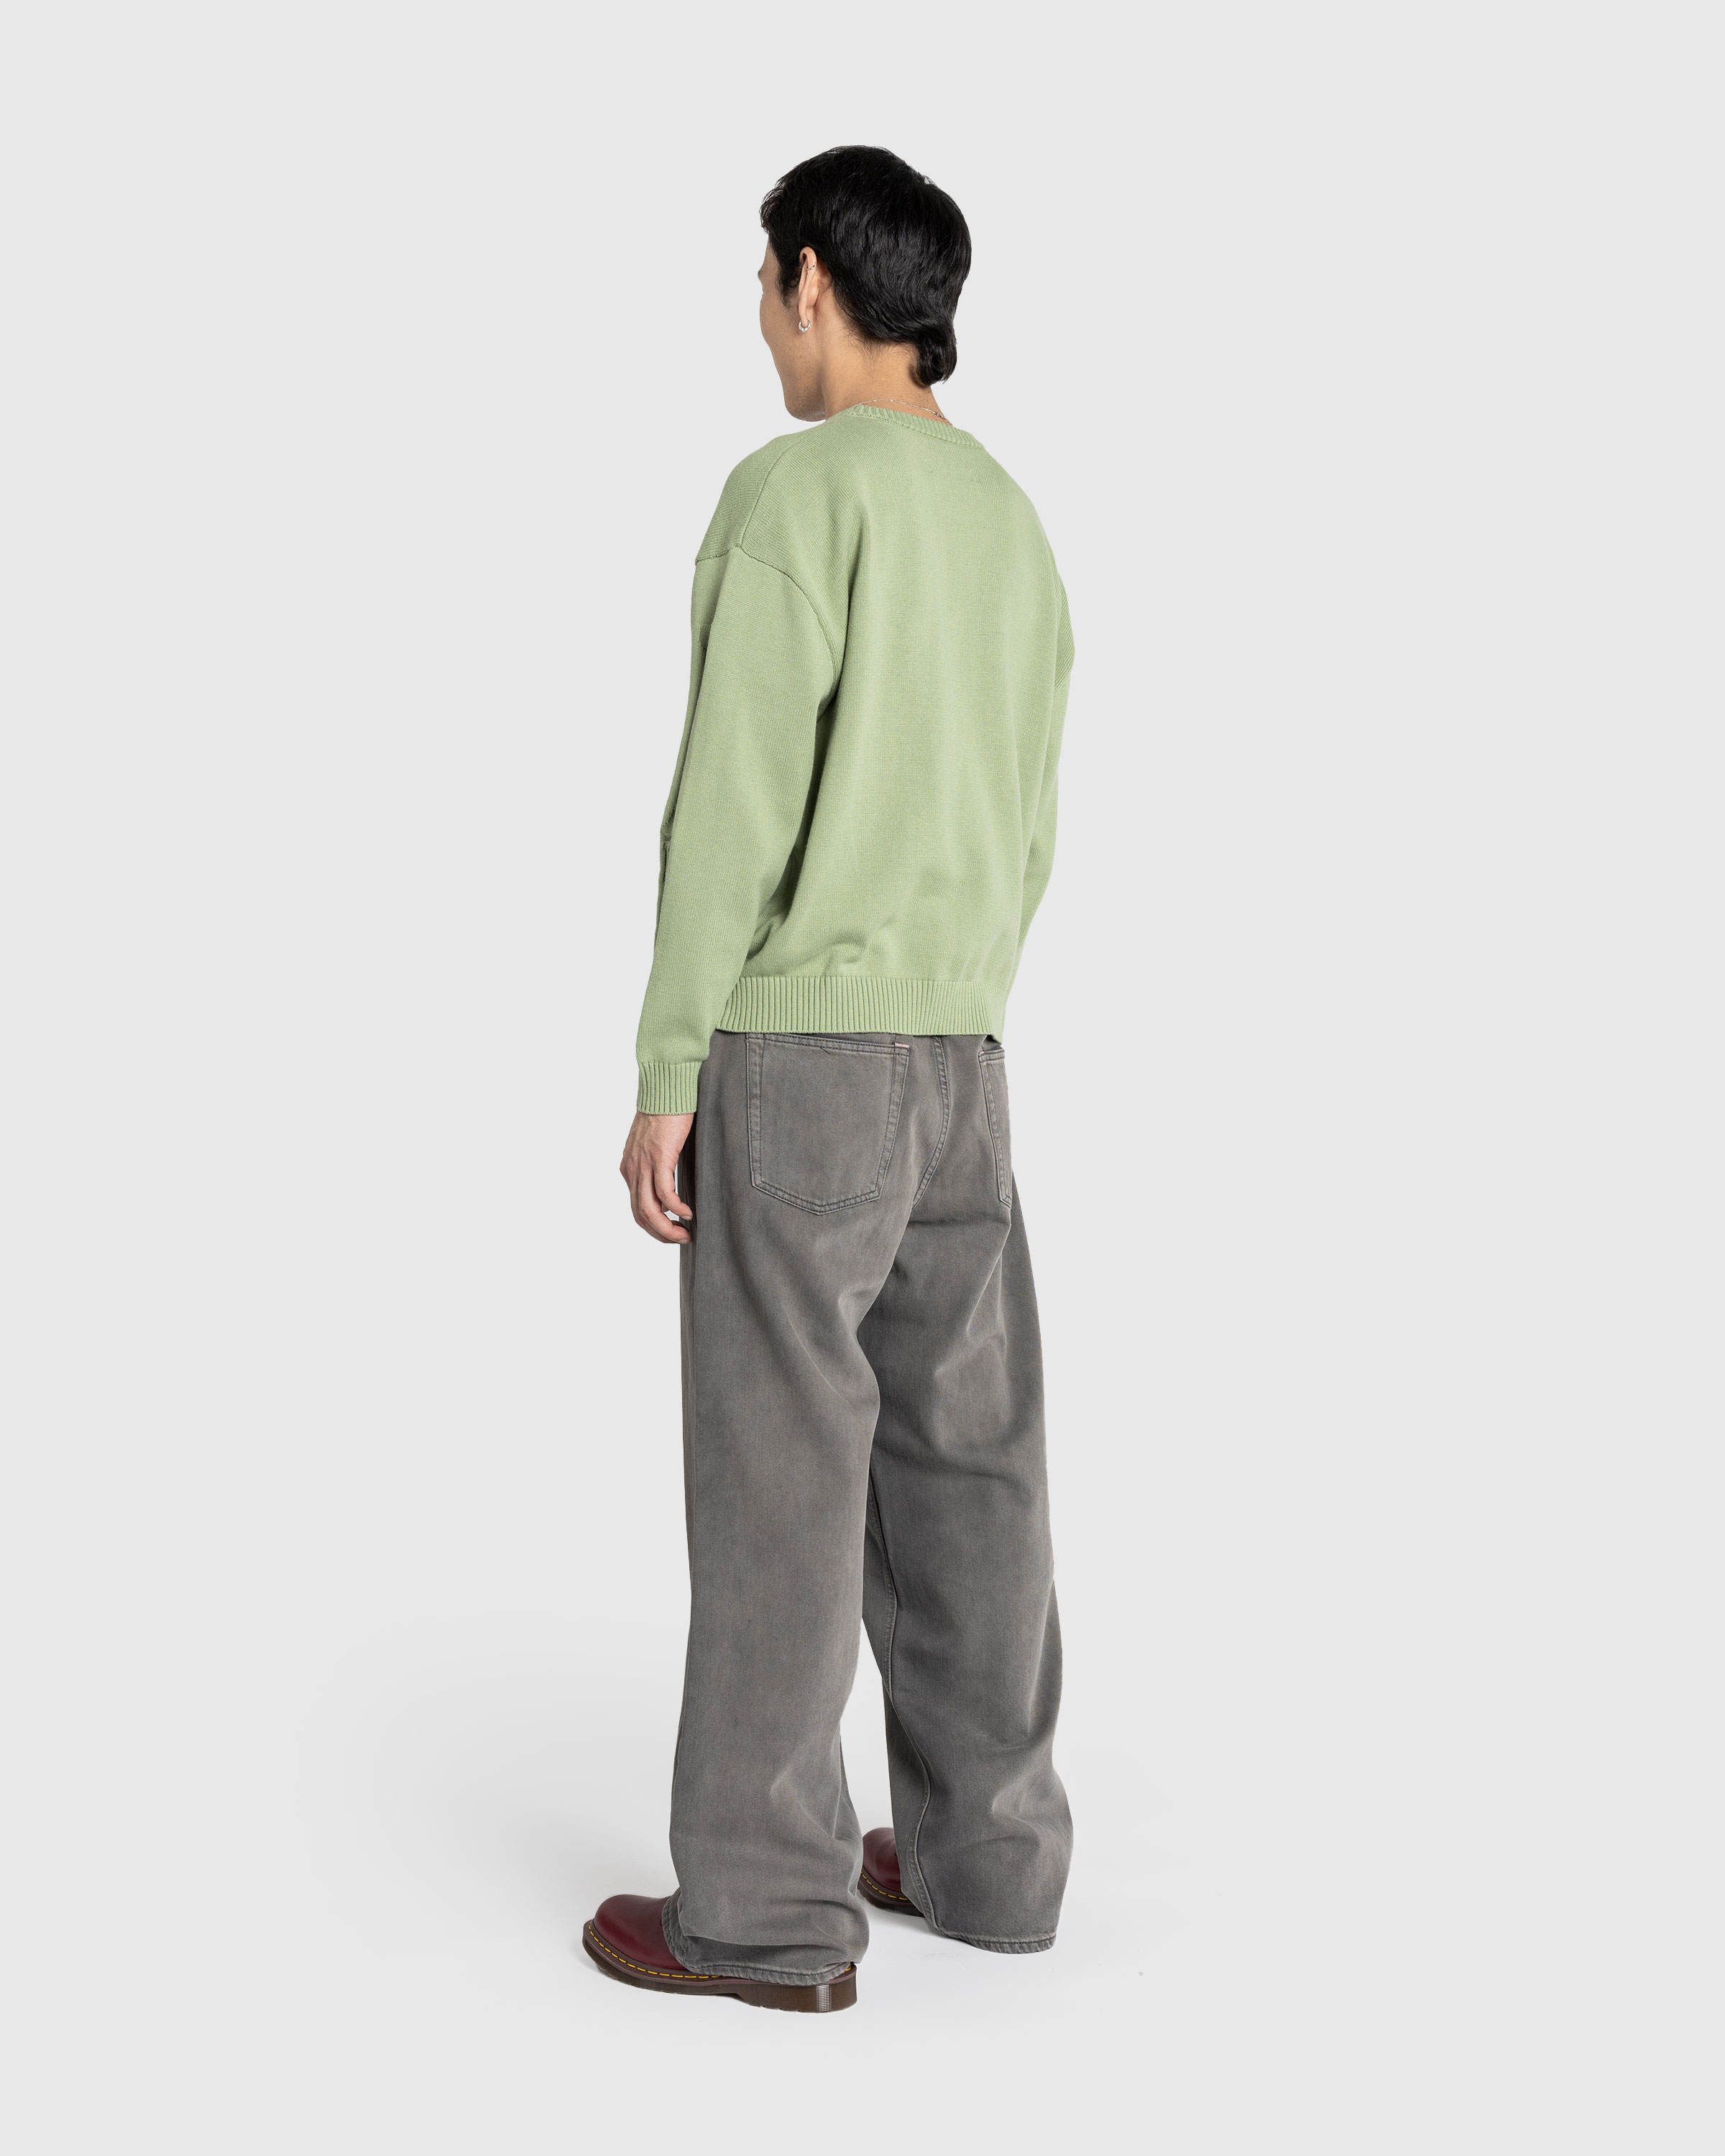 Acne Studios – Loose Fit Jeans 1981M Anthracite Grey - Pants - Grey - Image 4